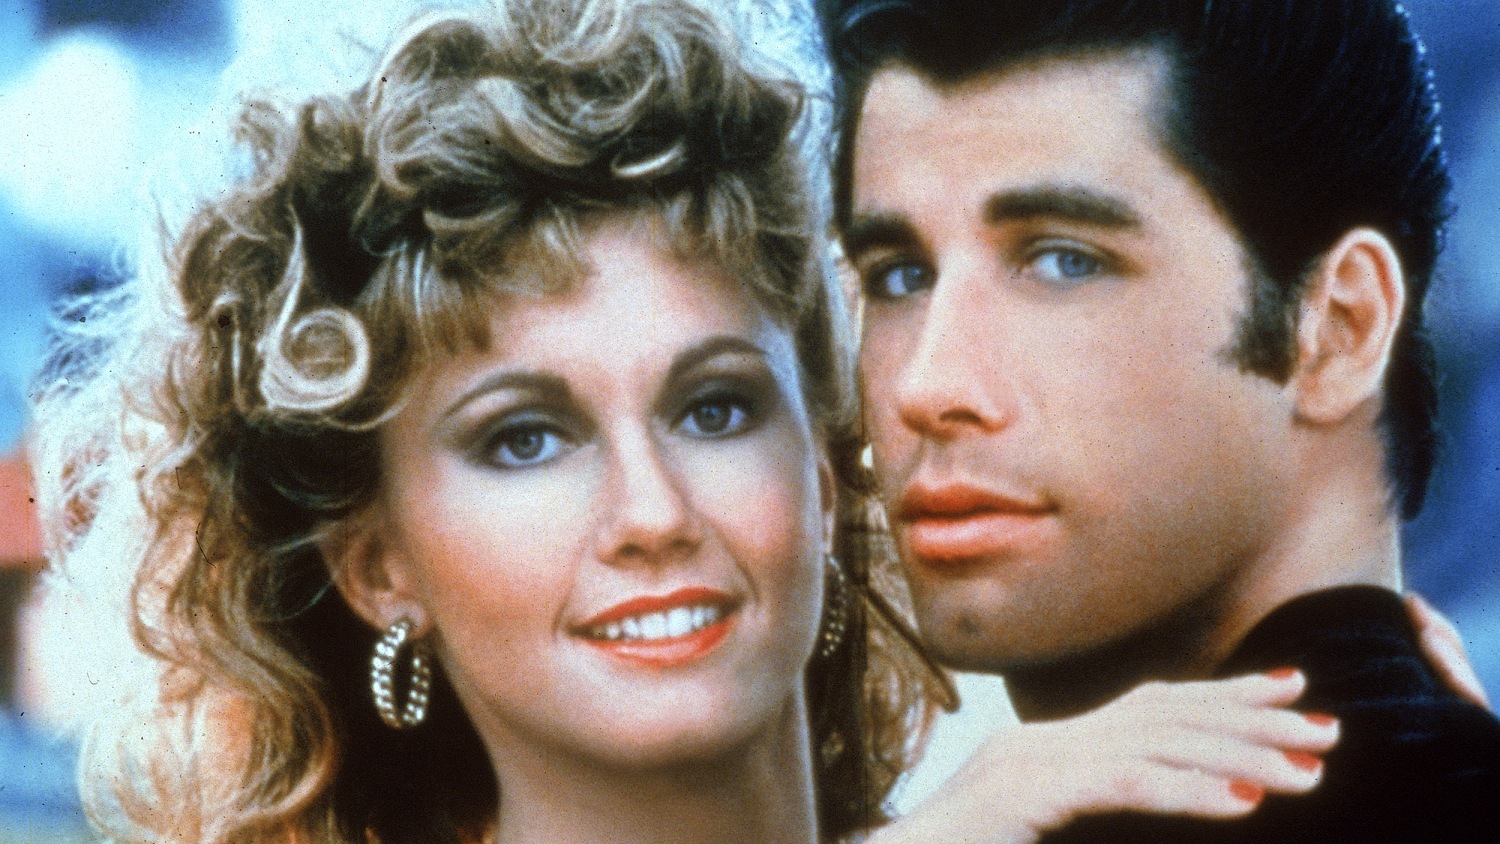 How 'Grease' made its stars look like teens (or at least tried)